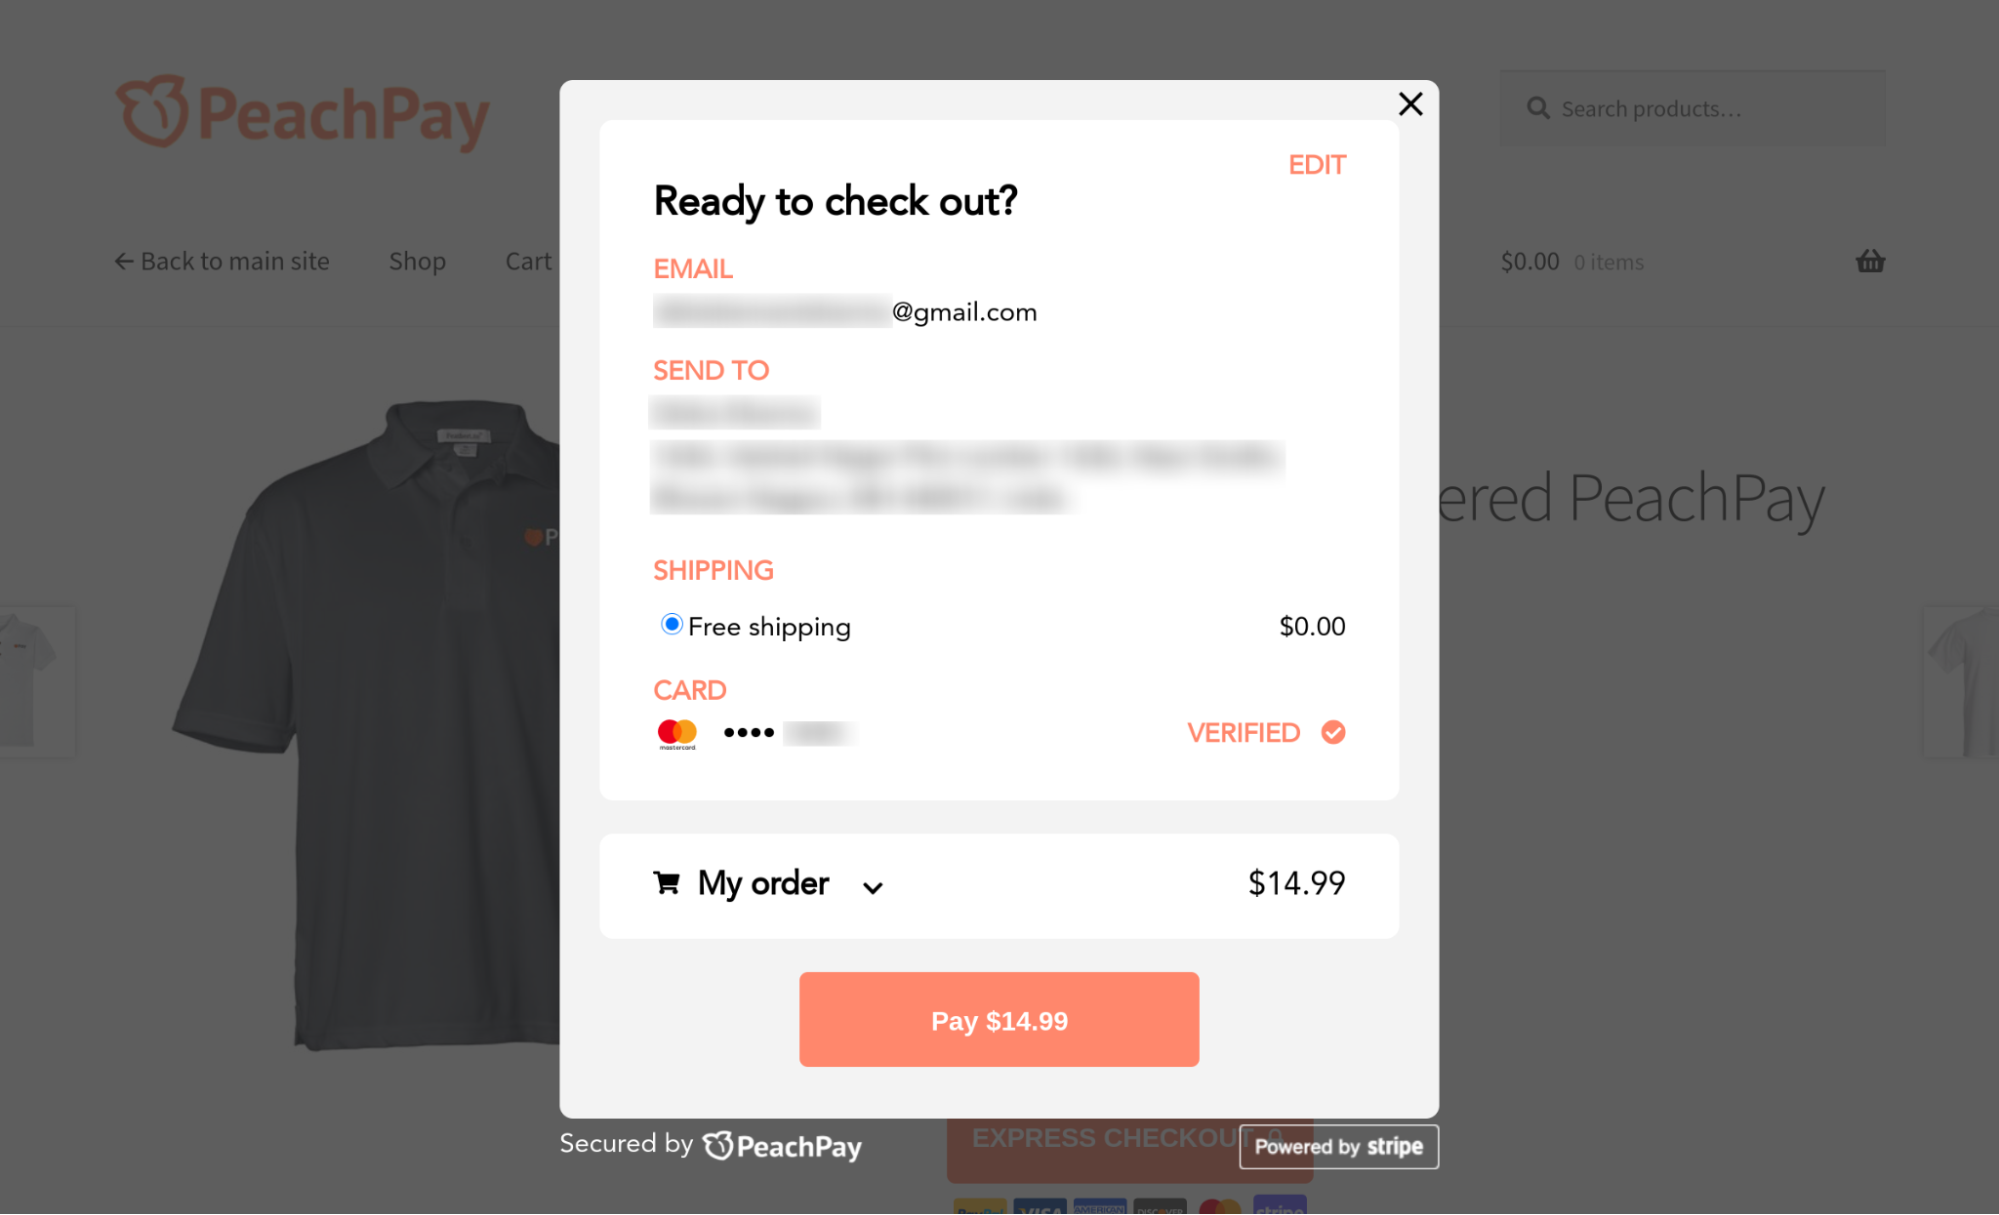 One-click checkout for returning users via PeachPay